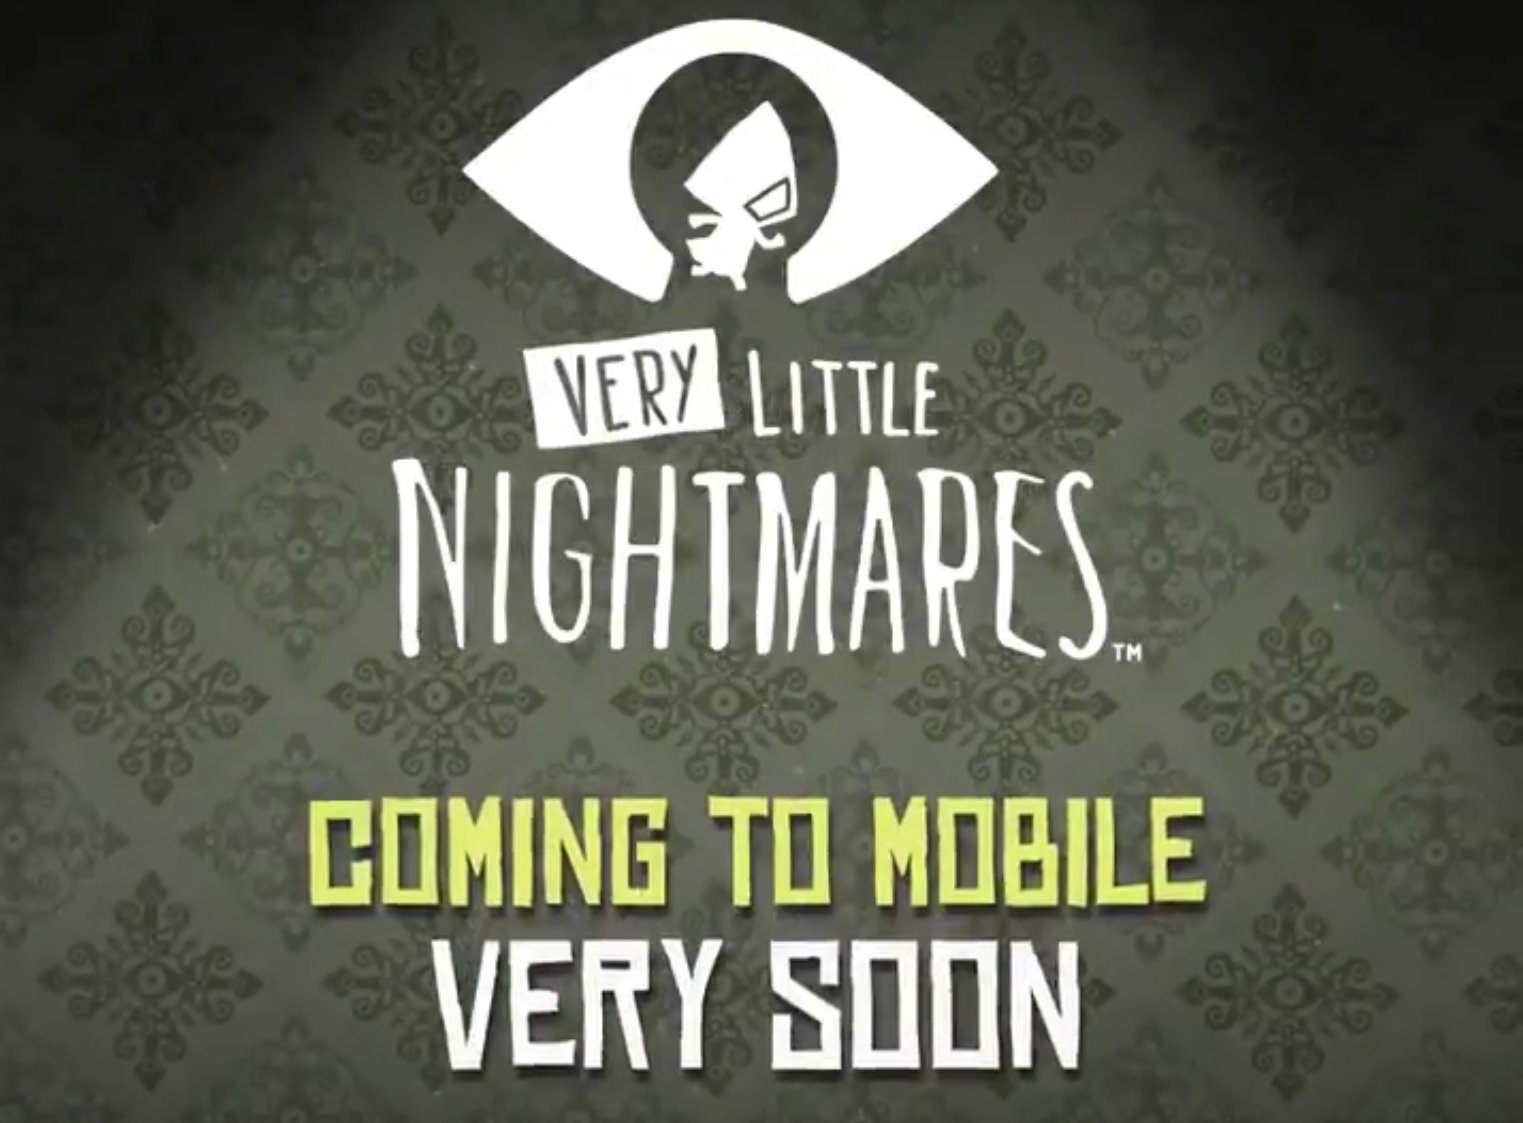 ‘Very Little Nightmares’ Is a New ‘Little Nightmares’ Game for iOS ...